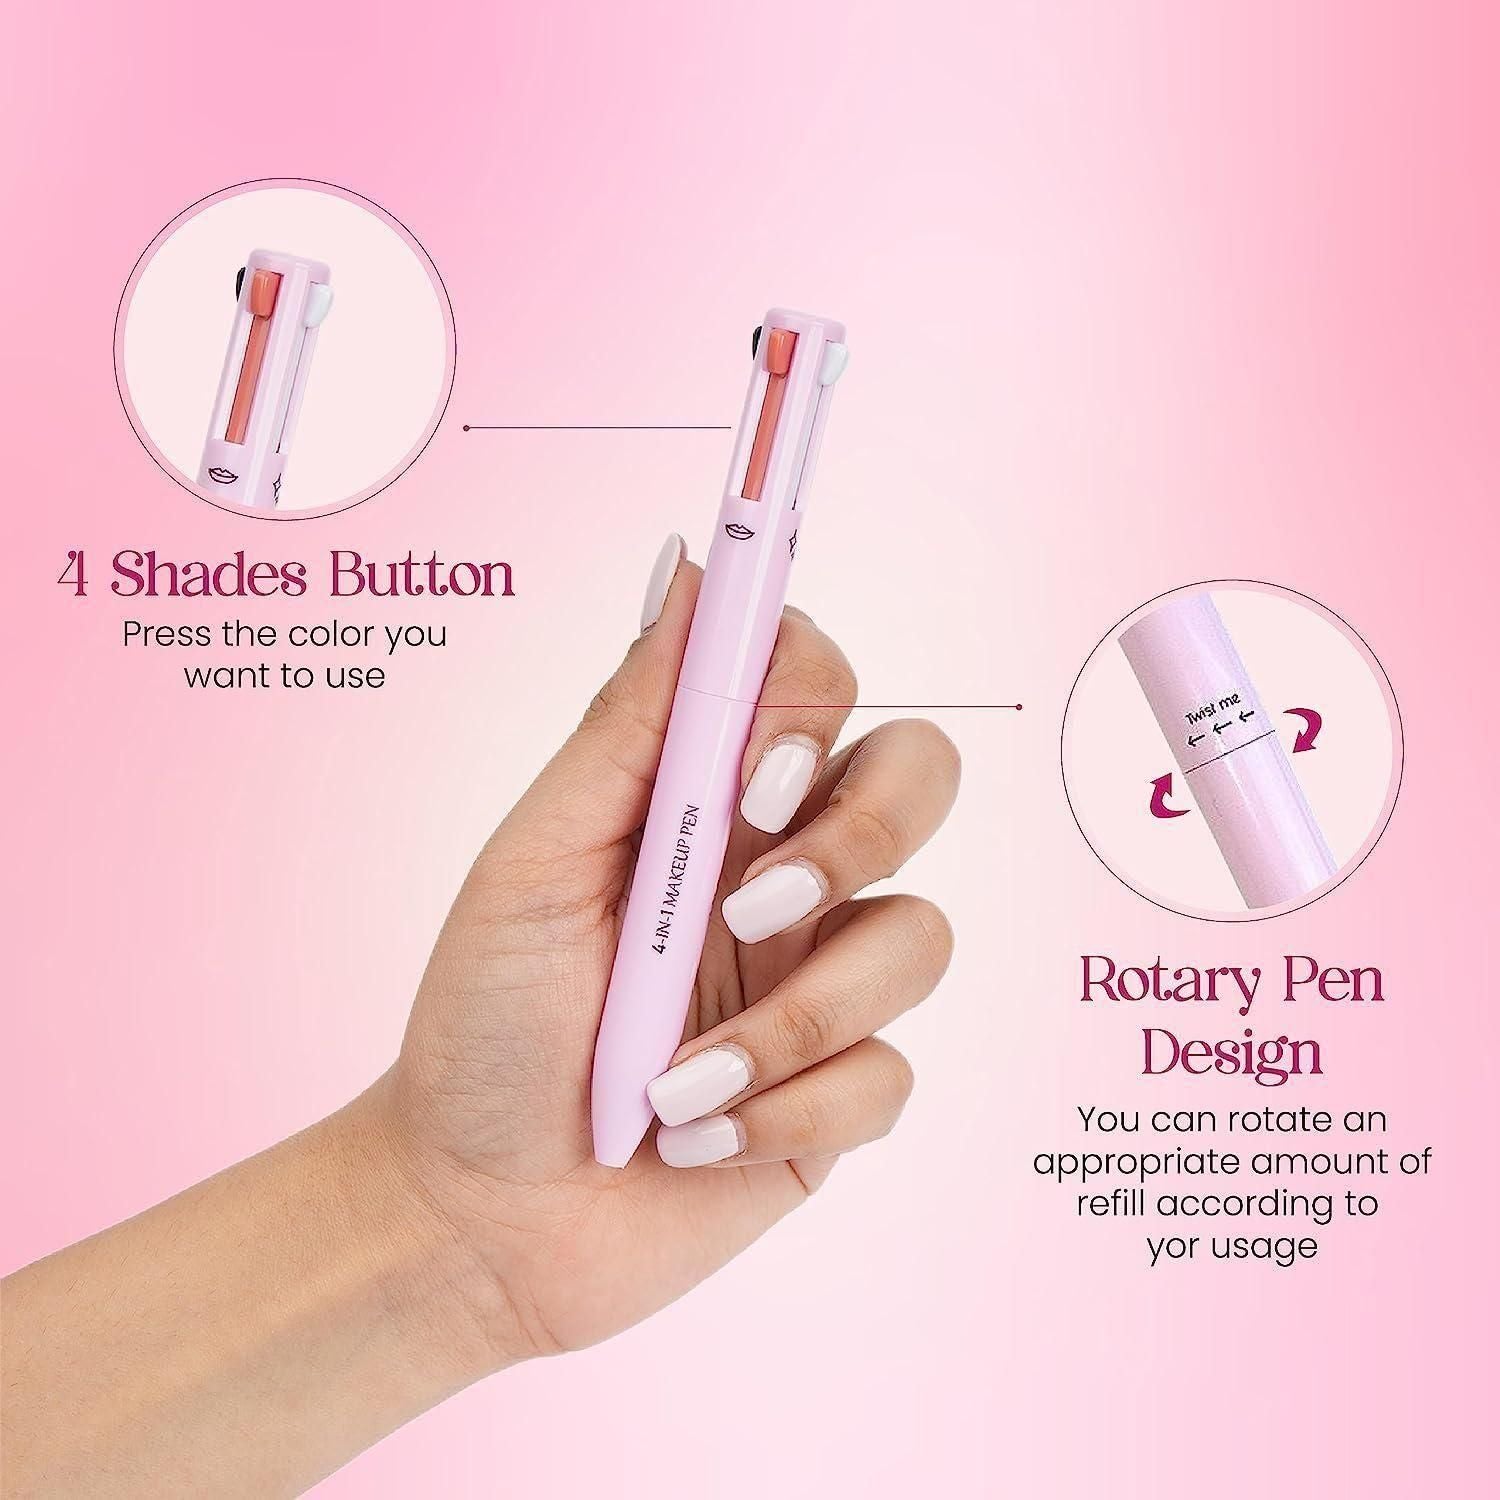 RR Beauty Products The Original 4 IN 1 Makeup Pen (100% Natural and Organic)